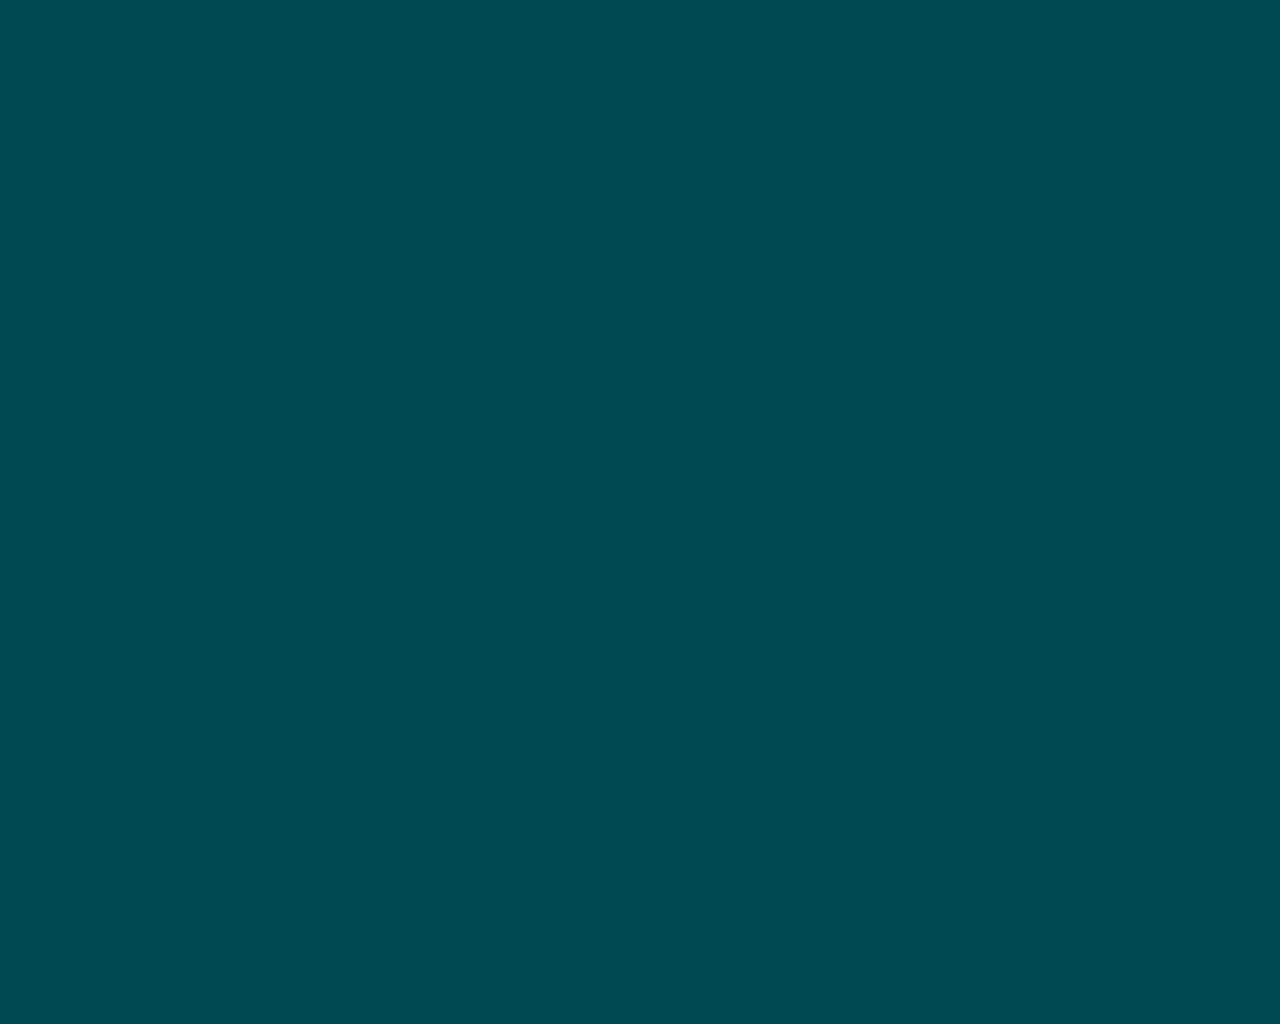 1280x1024 Midnight Green Solid Color Background